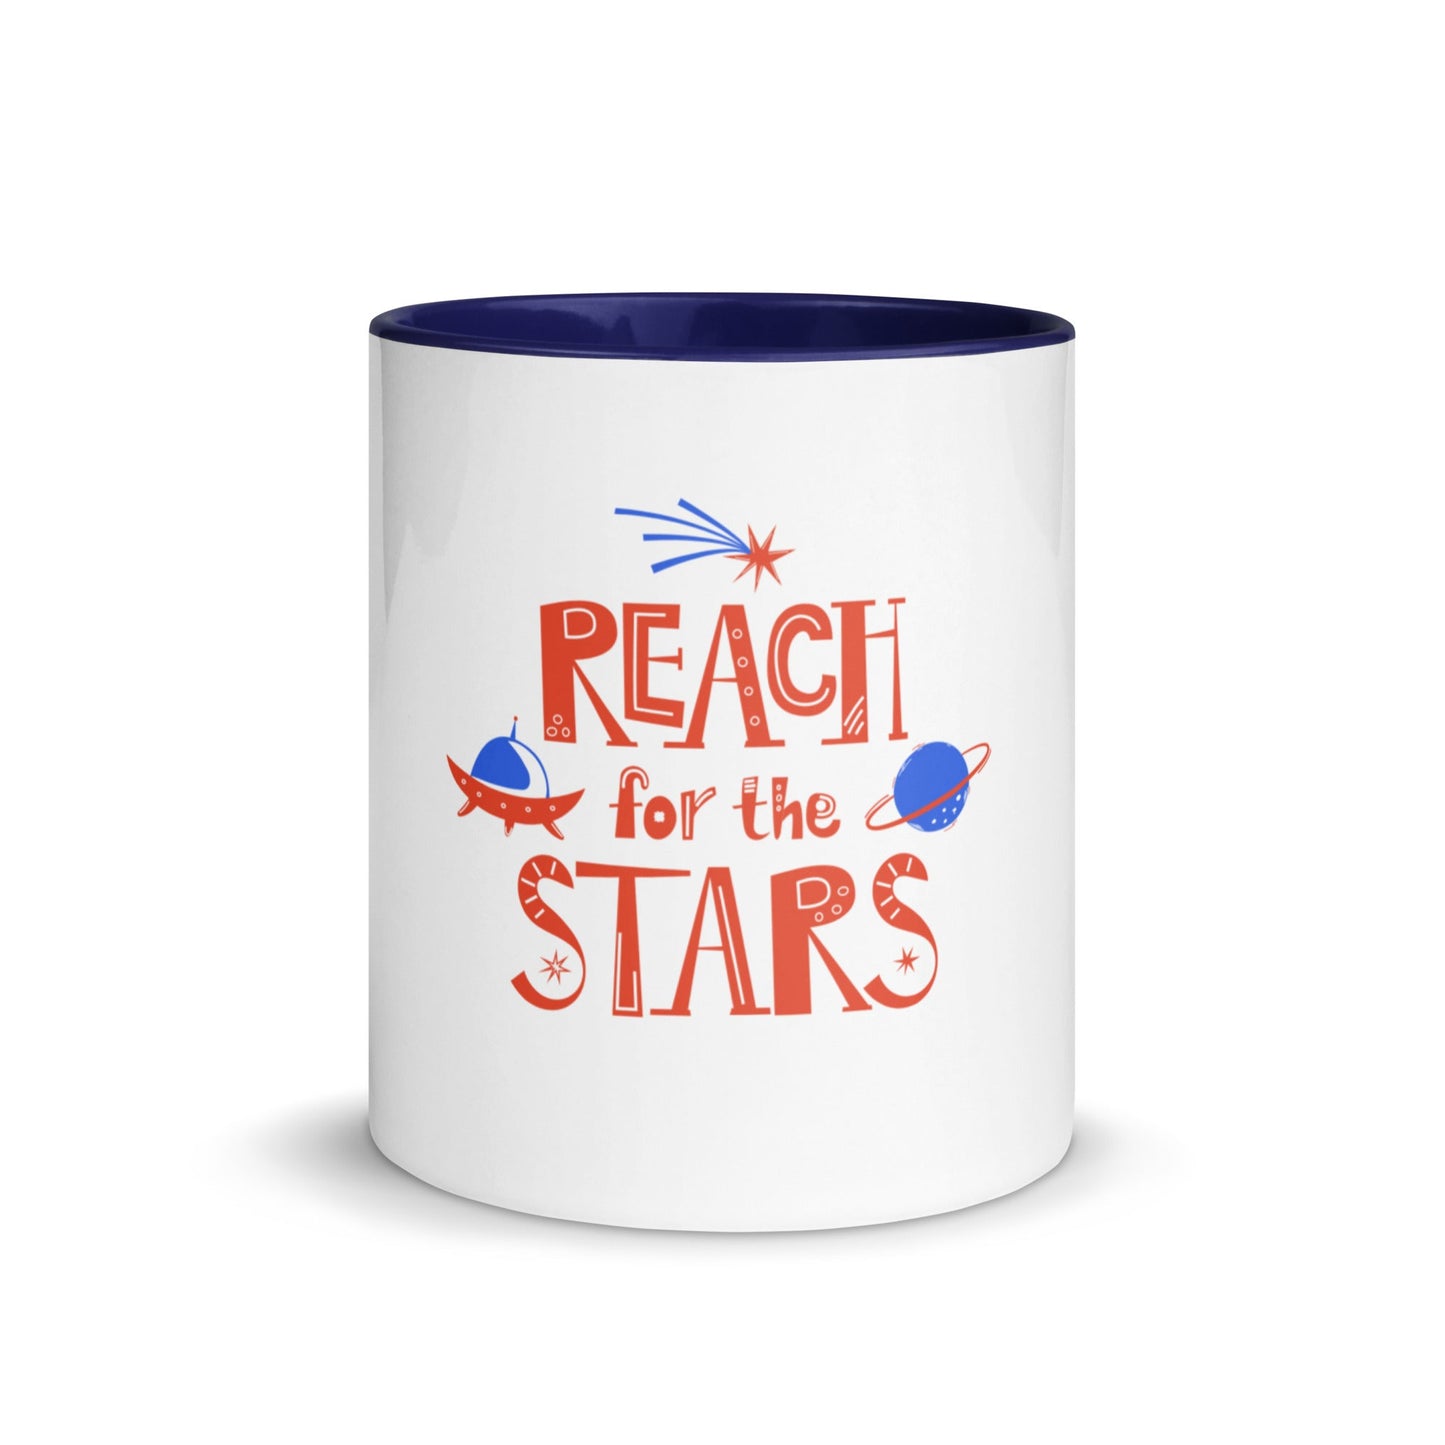 Reach for the Stars Mug - Embrace Ambition and Beyond | Inspirational Coffee Cup for Dreamers